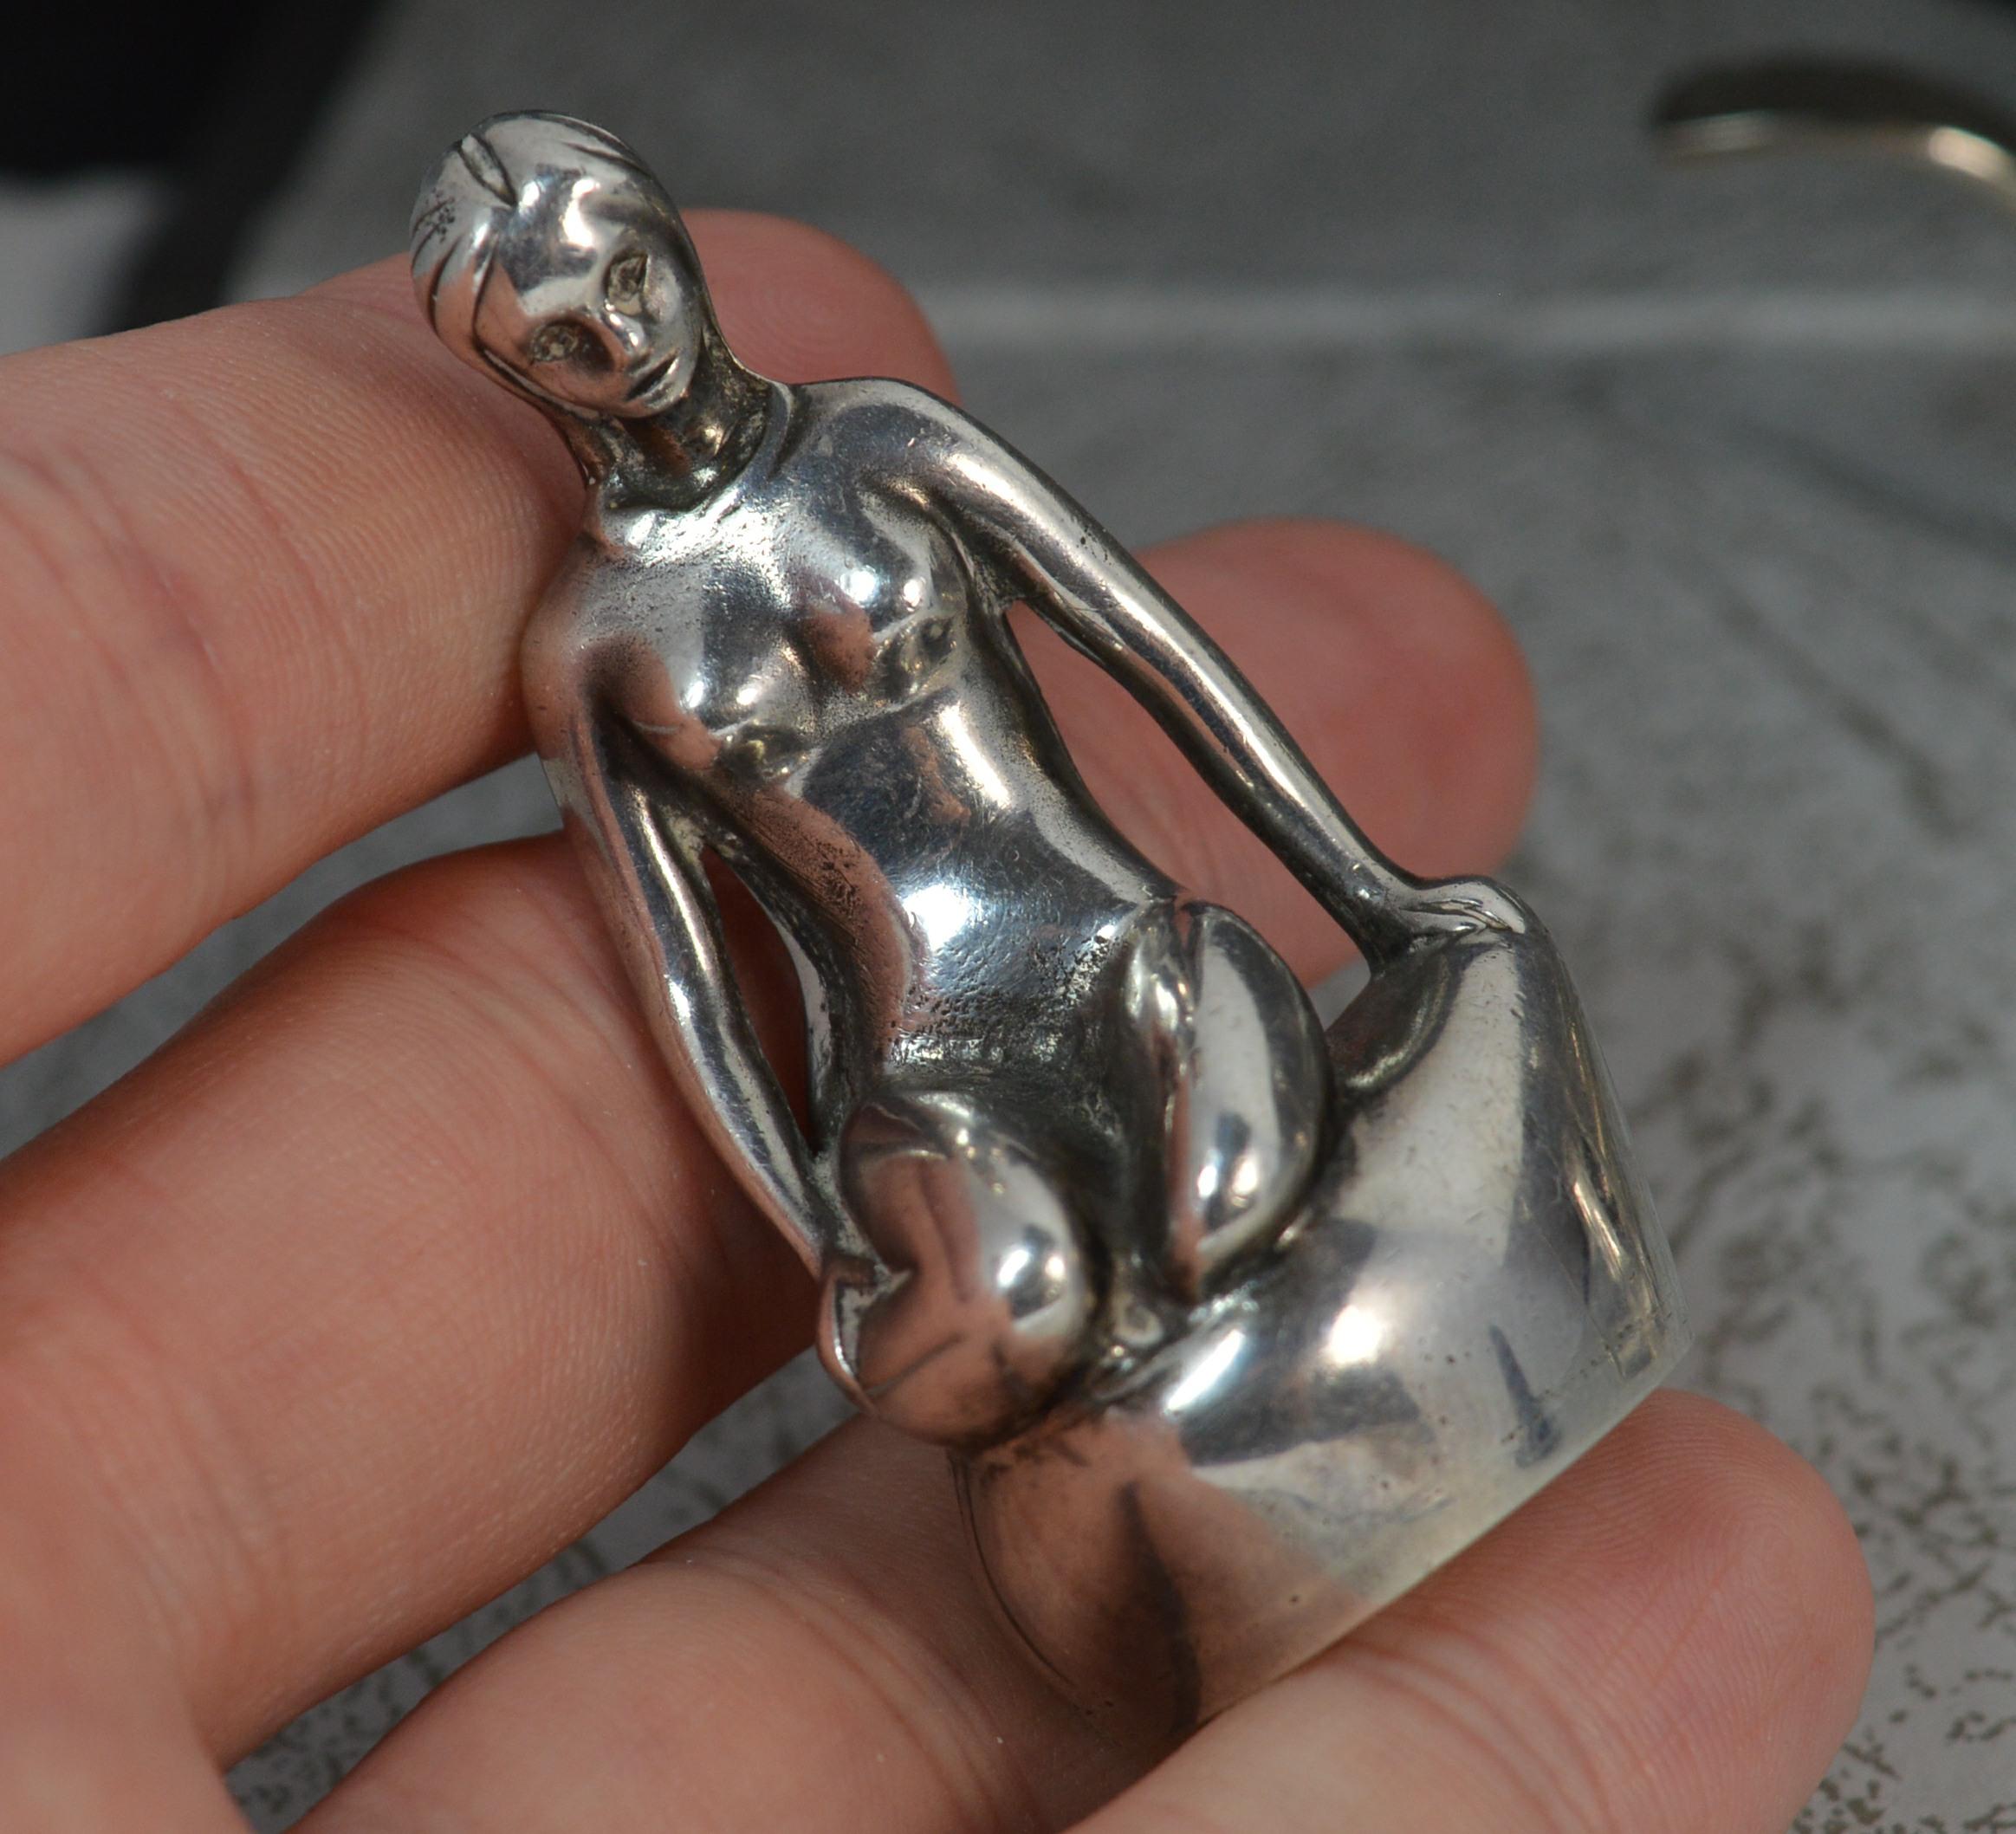 

A stylish sterling silver statue or figure.

Designed as a mermaid on stone.

Most likely Ariel from the Disney film The Little Mermaid.



Hallmarks ; 925 and makers marks

Weight ; 52.6 grams

Size ; 22mm diameter base, 5.2cm tall

Condition ;